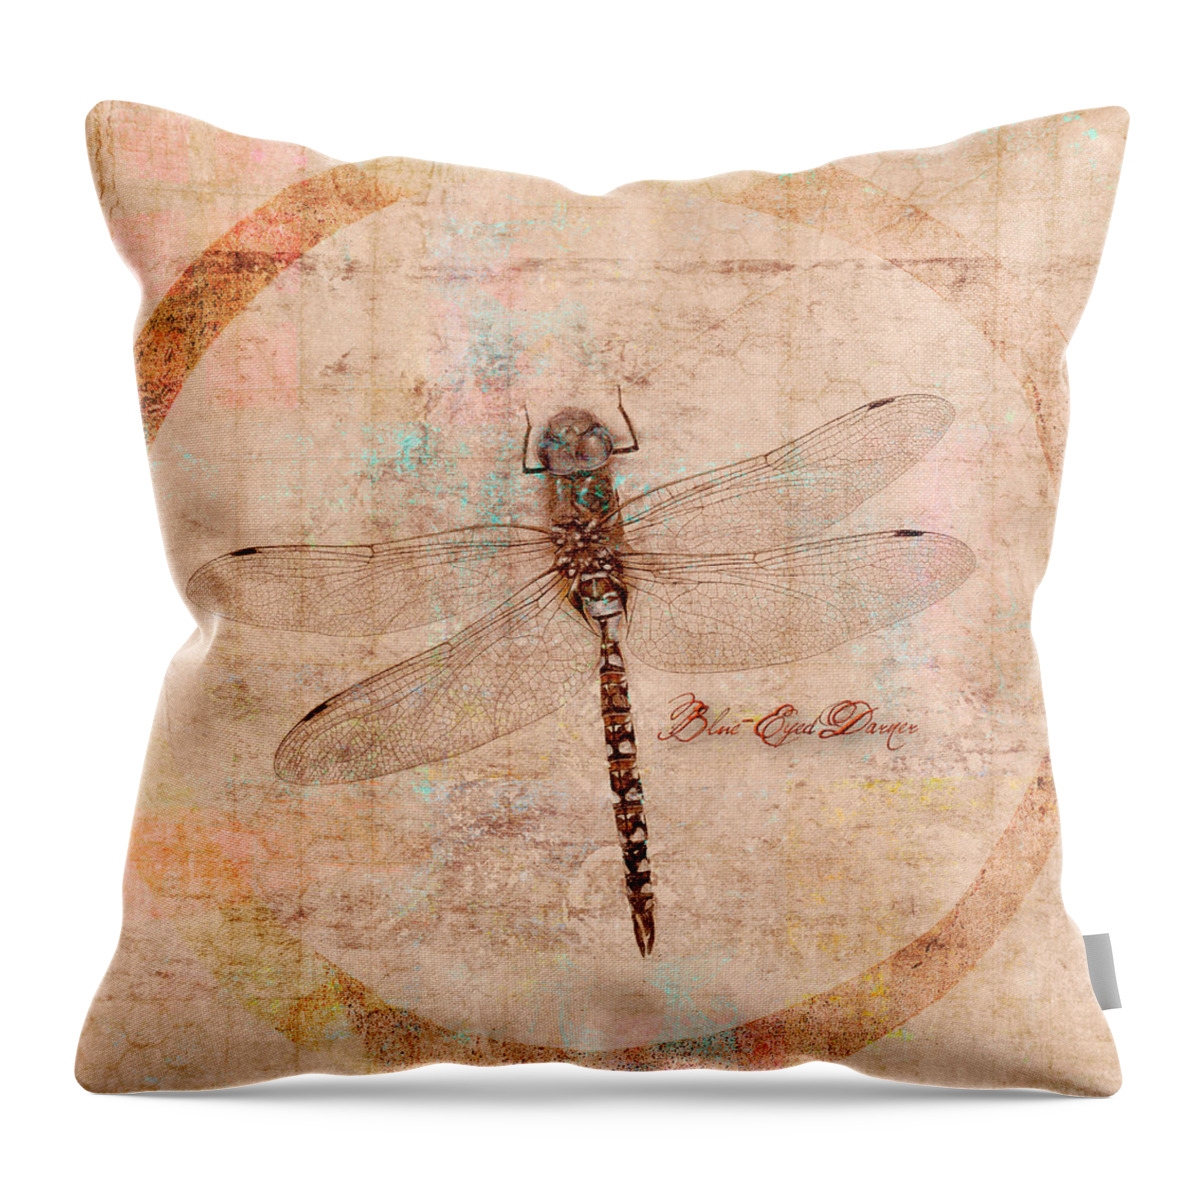 Dragonfly Throw Pillow featuring the mixed media Dragonfly by Carol Leigh